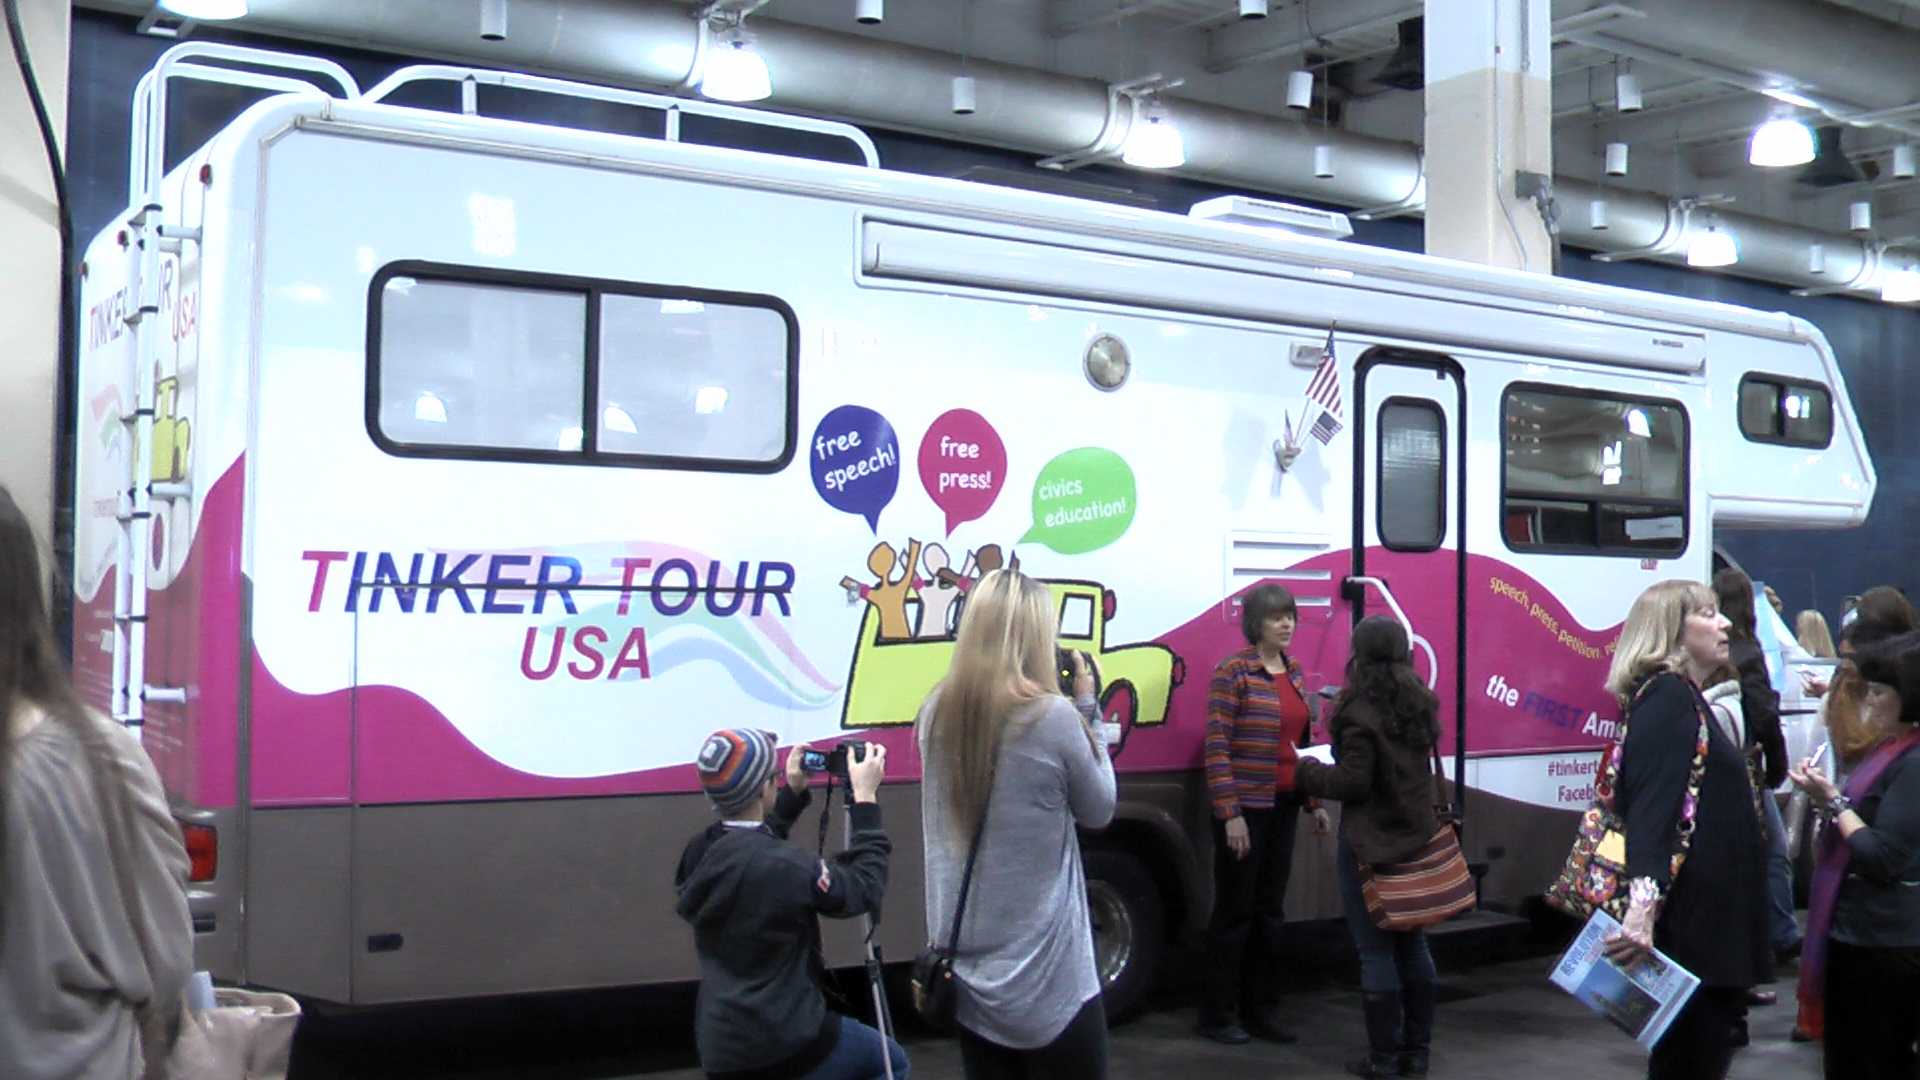 "I’m going on the “Tinker Tour” — a bus (or RV) tour   across the country to promote youth voices, free speech and a free press," Tinker said on her website.